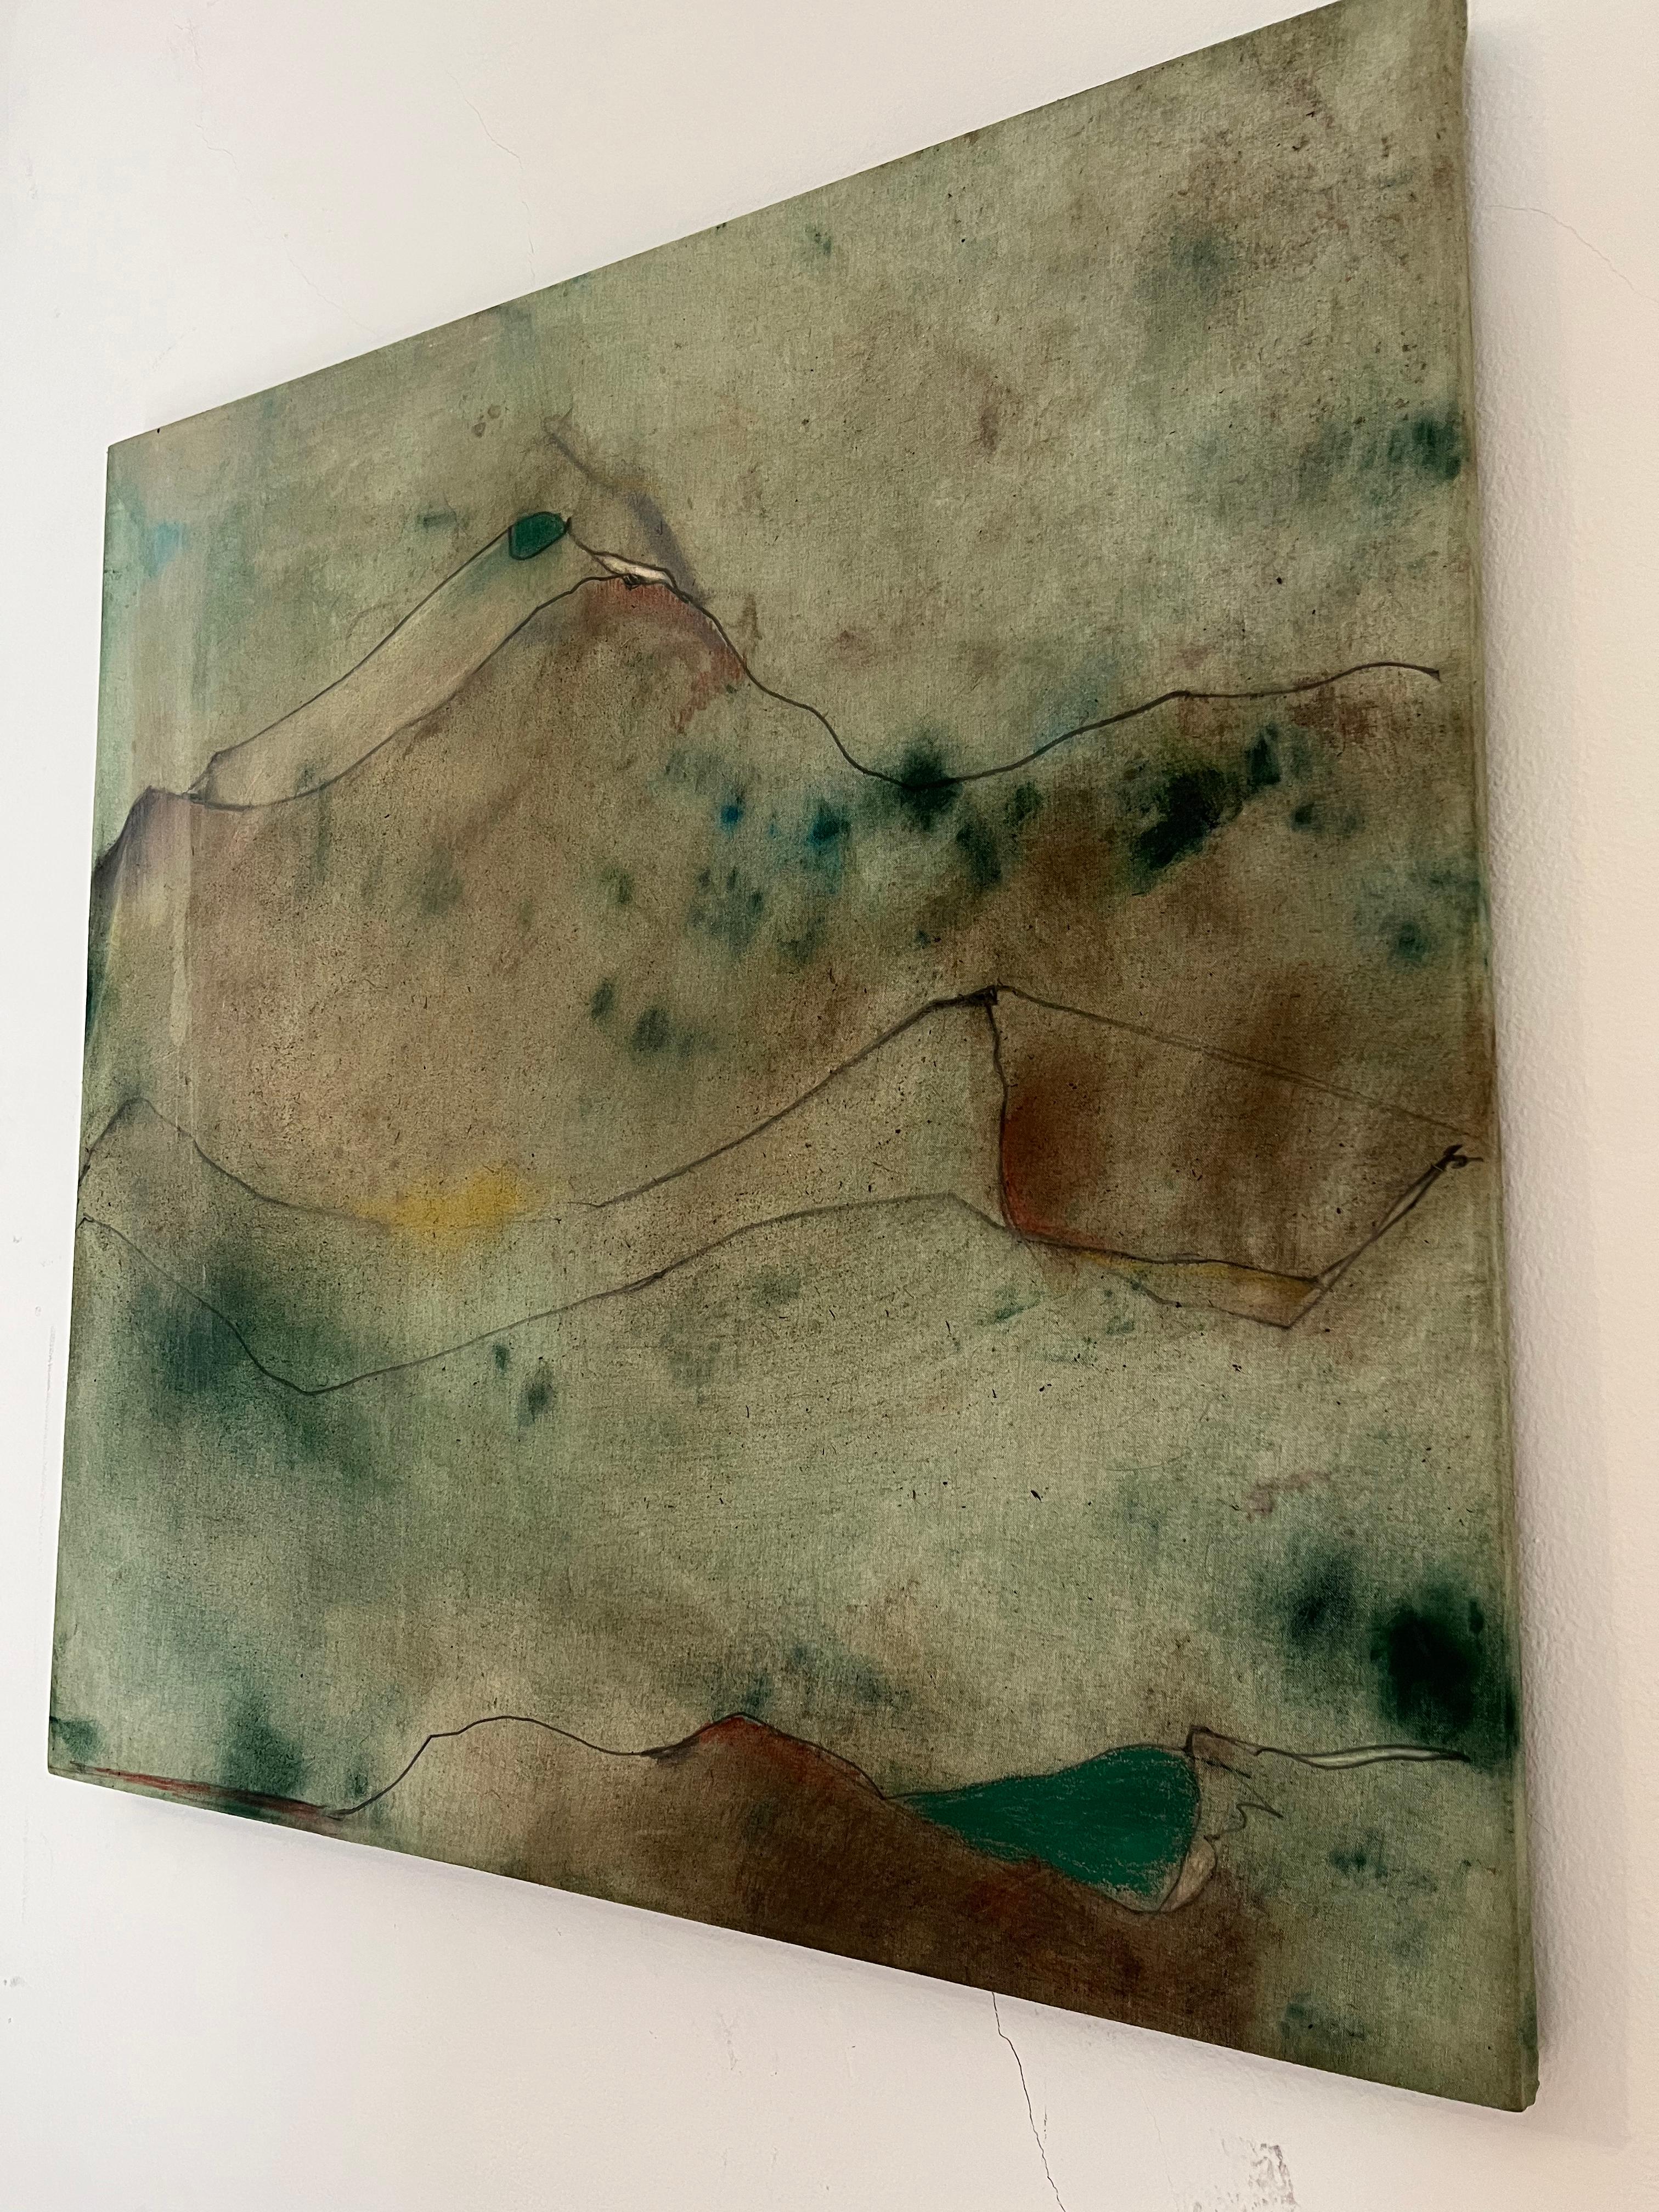 Ground
oil  on natural cotton canvas
70X70 cm

Original Artwork made in Italy by Marilina Marchica
the painting is sold stretched out on a wooden frame ready to hang

My painting tells of the relationship between man, nature and time, the landscape,